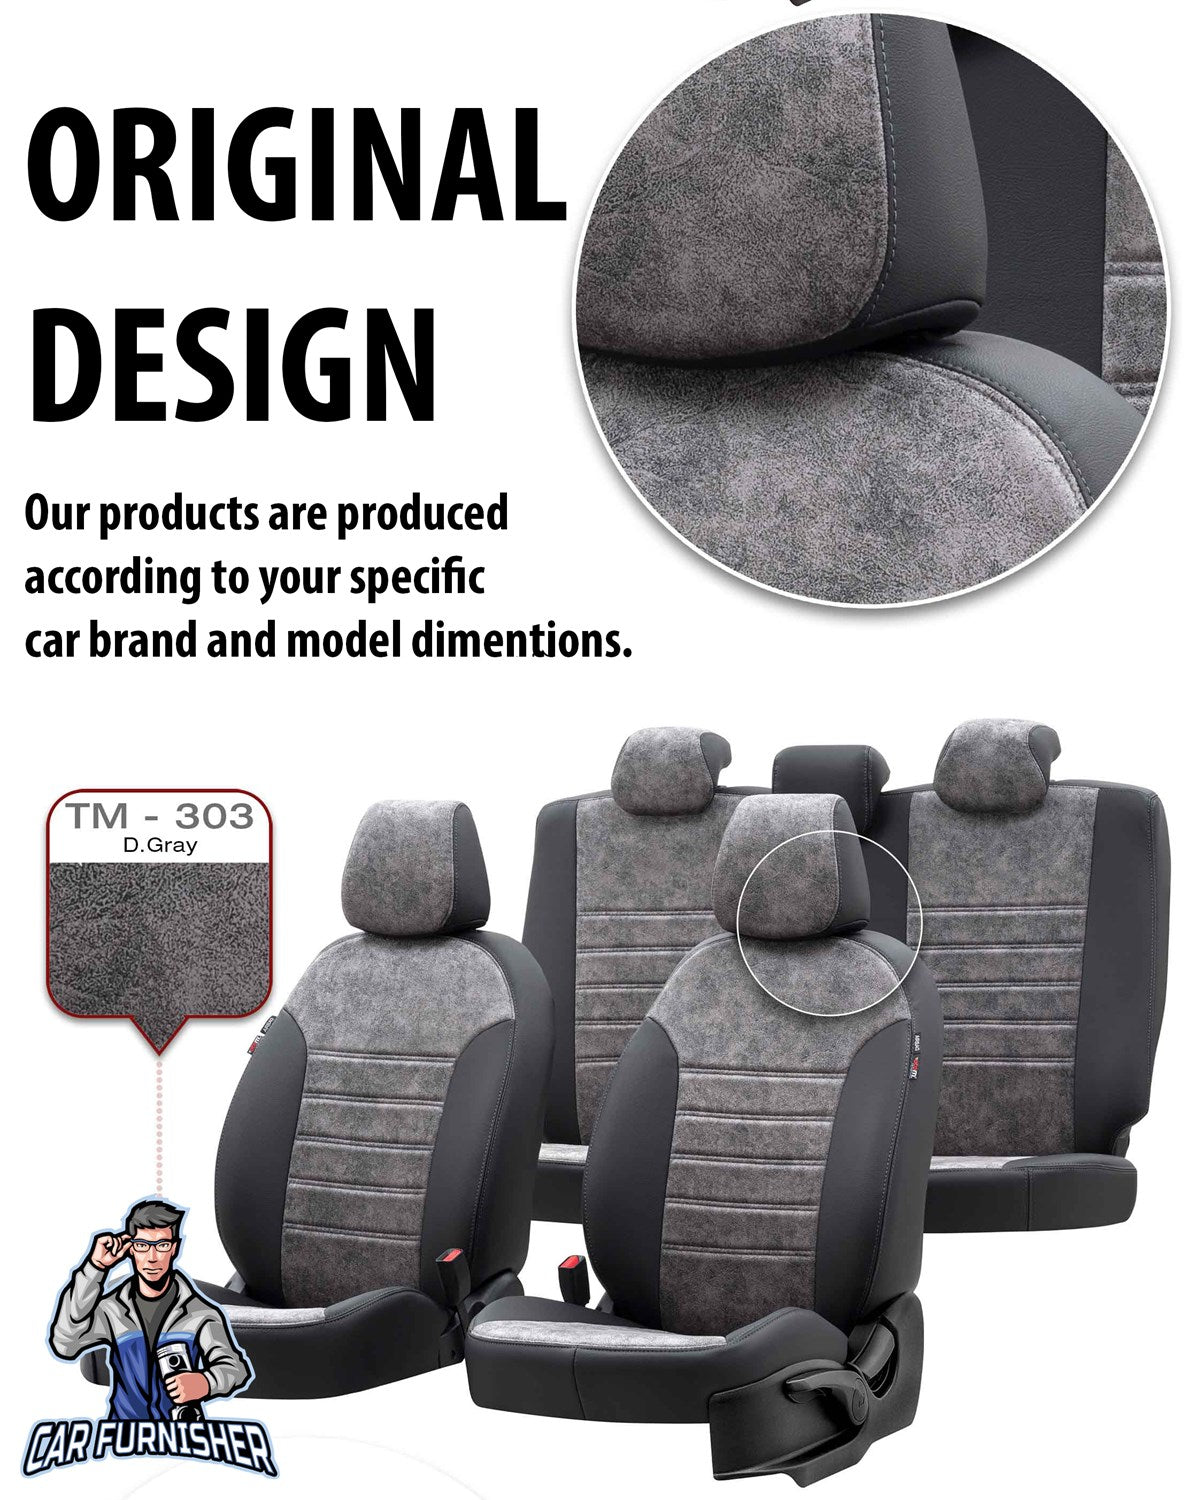 Toyota Aygo Seat Cover Milano Suede Design Beige Leather & Suede Fabric